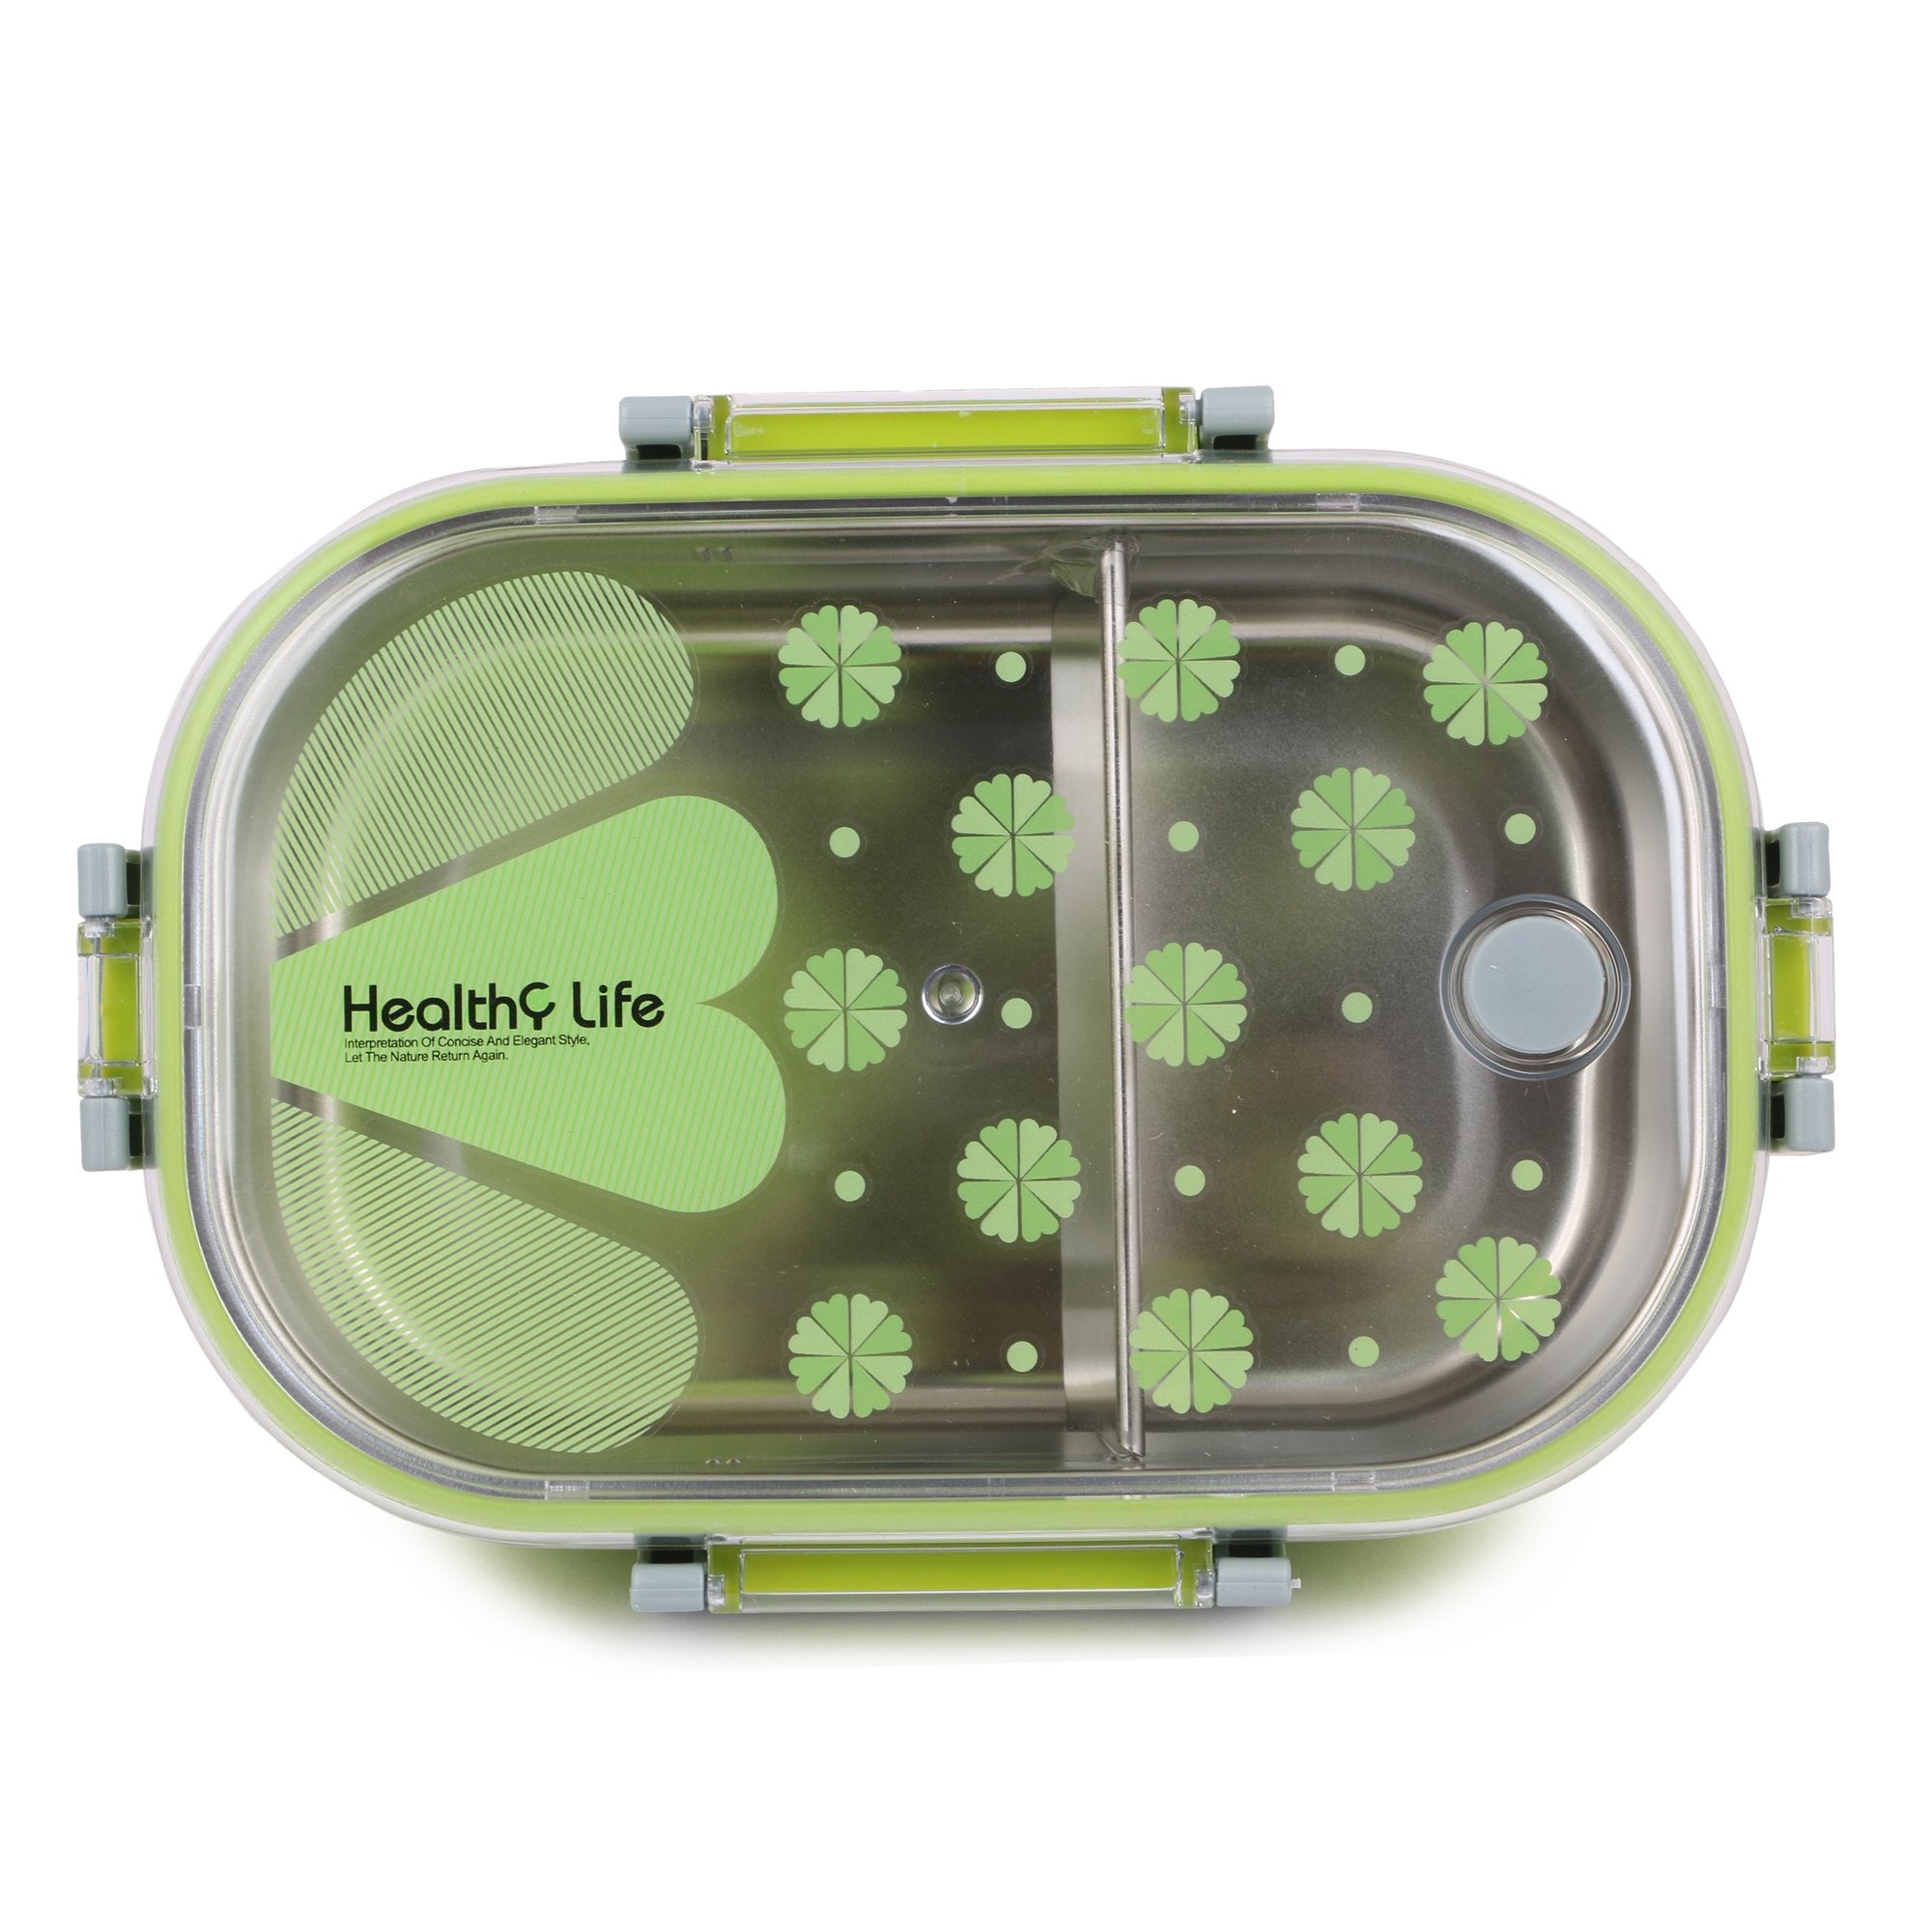 Stainless Steel Insulated 2 Grid Lunch Box Size: 6541 980ml